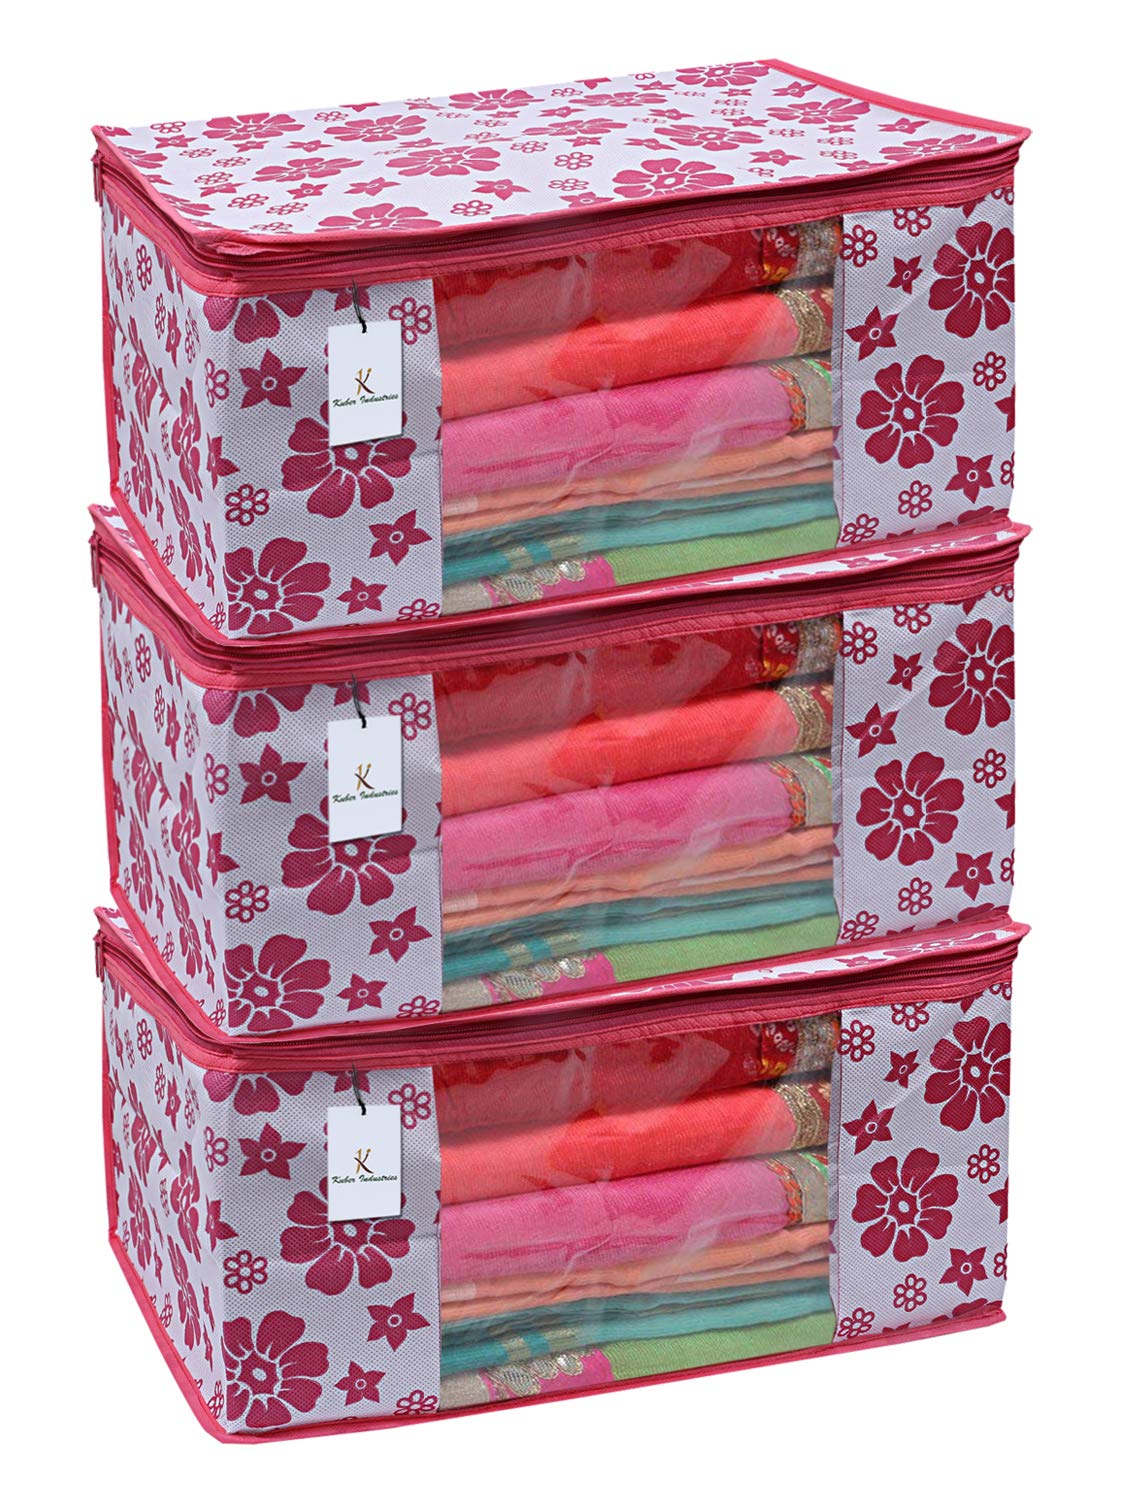 Kuber Industries 3 Piece Non Woven Saree Cover Set, Pink,Large Size -CTKTC6400